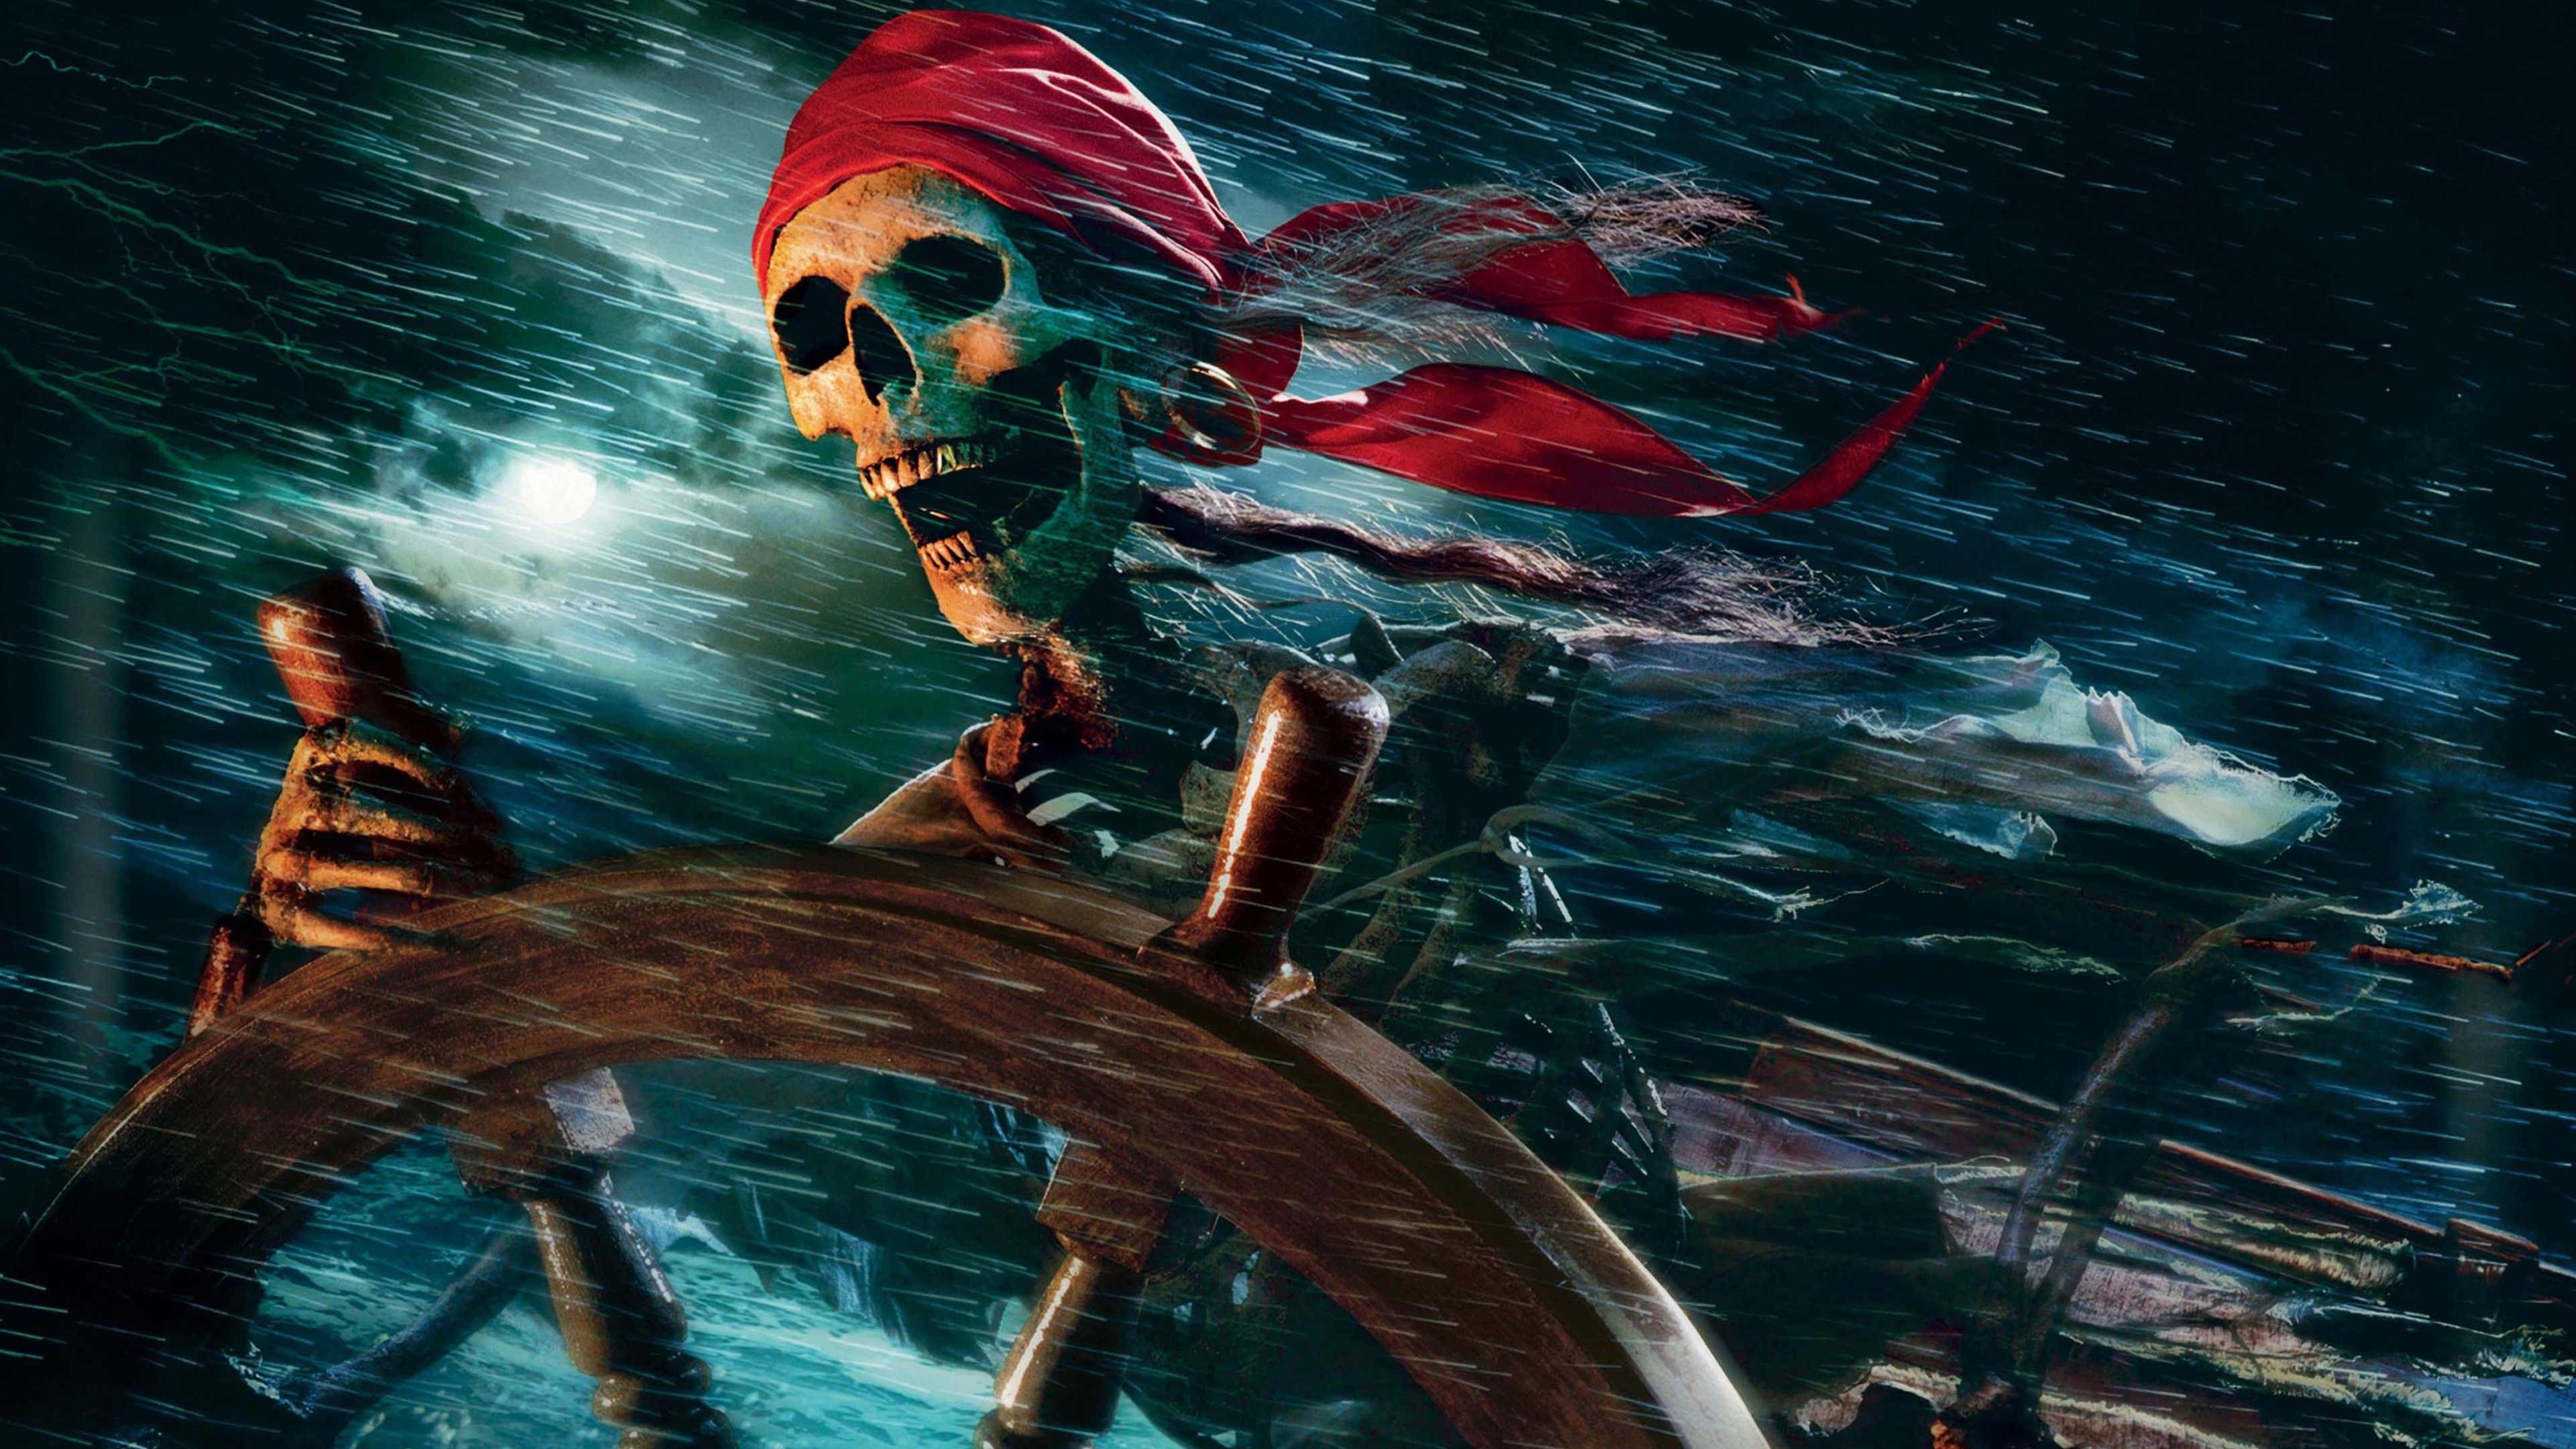 A skeleton with a red bandana on its head is steering a ship - Pirate